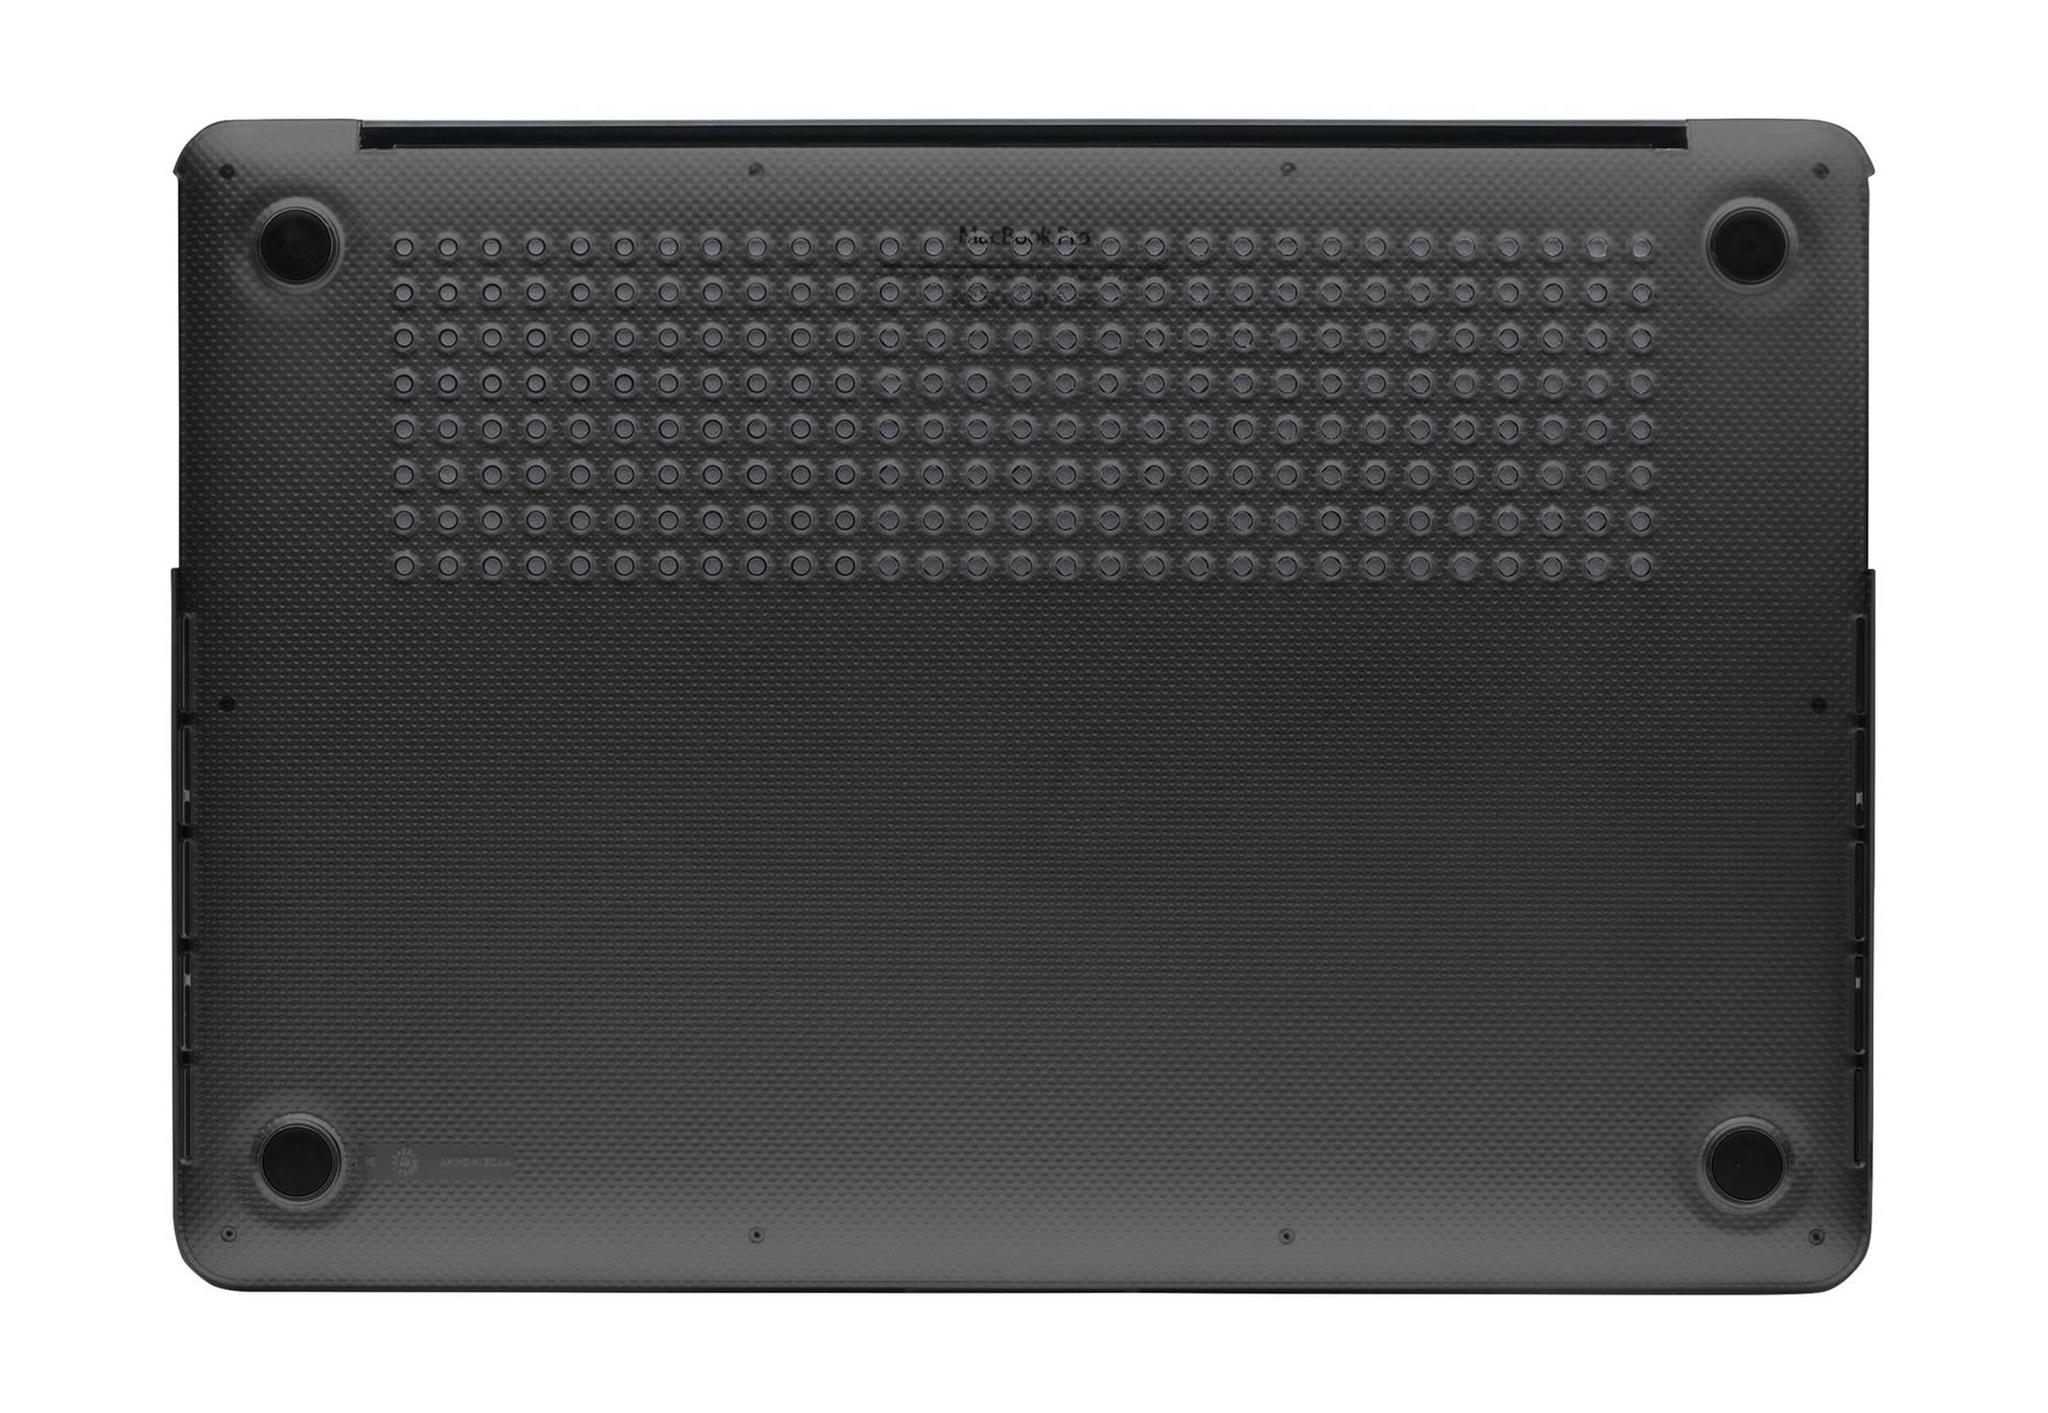 Incase Dots Protective Hardshell Case for MacBook Pro Retina 15.6-inch (CL60609) - Black